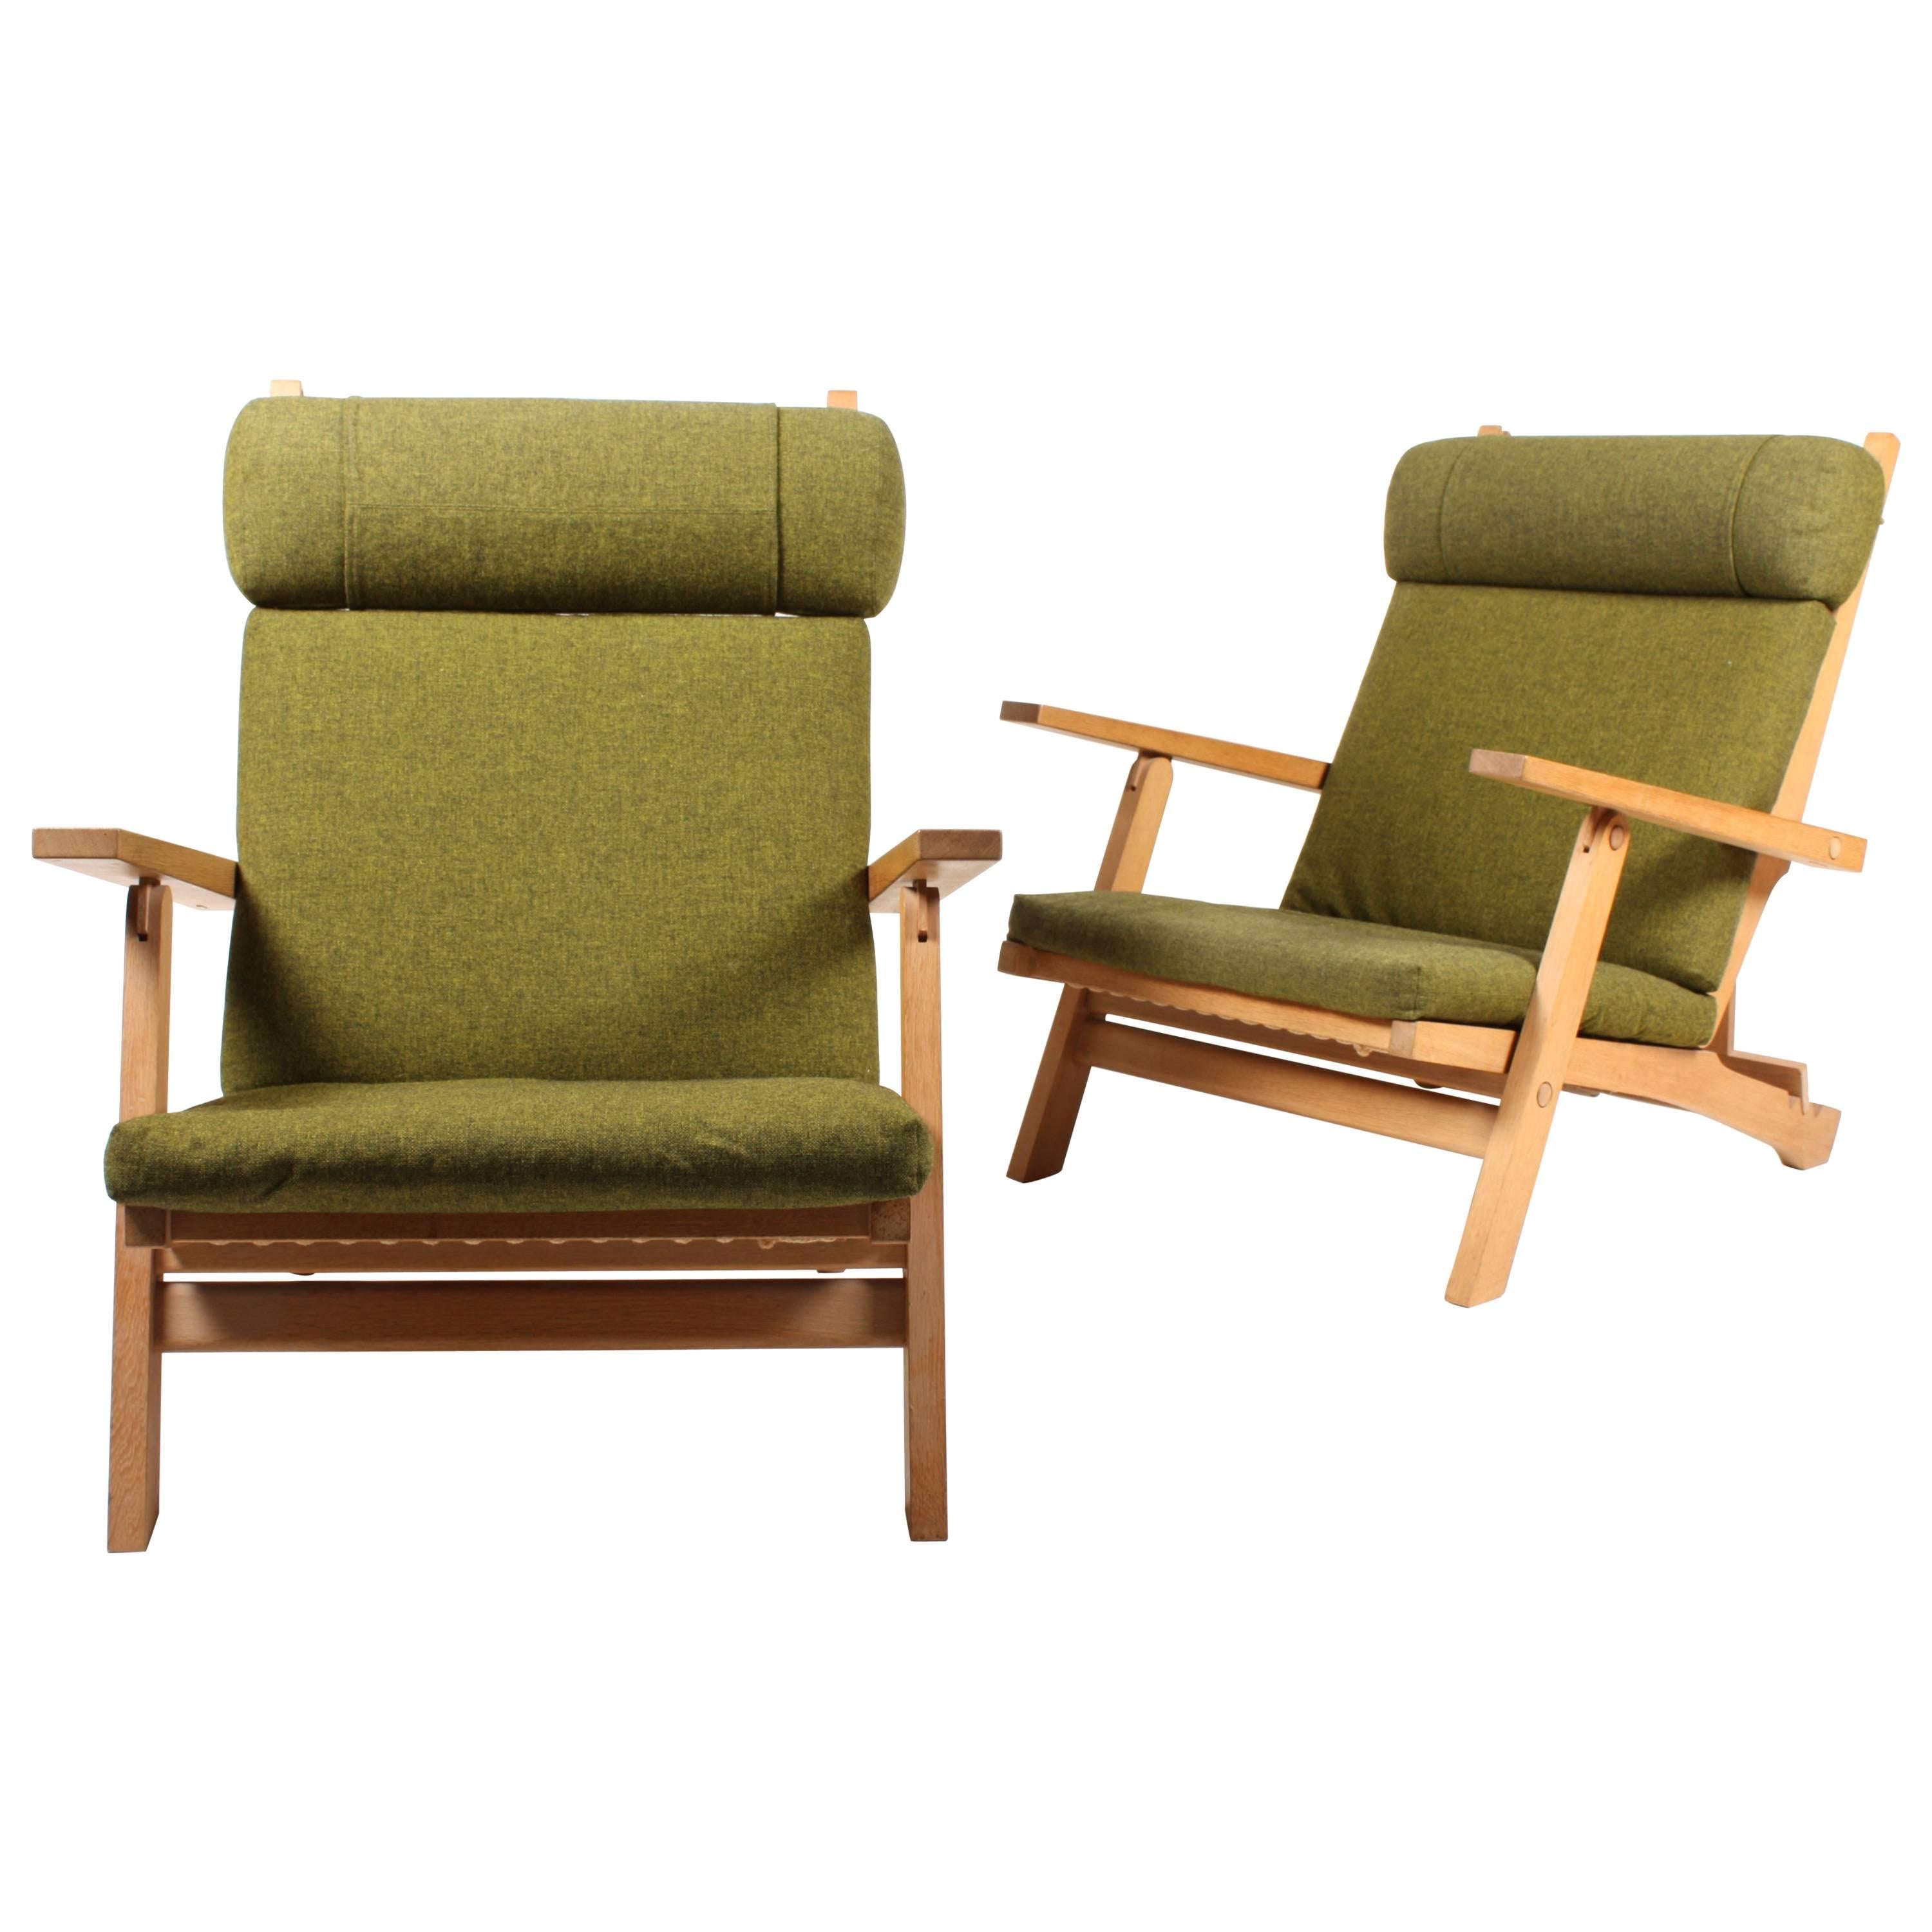 Pair of Rare Lounge Chairs by Wegner